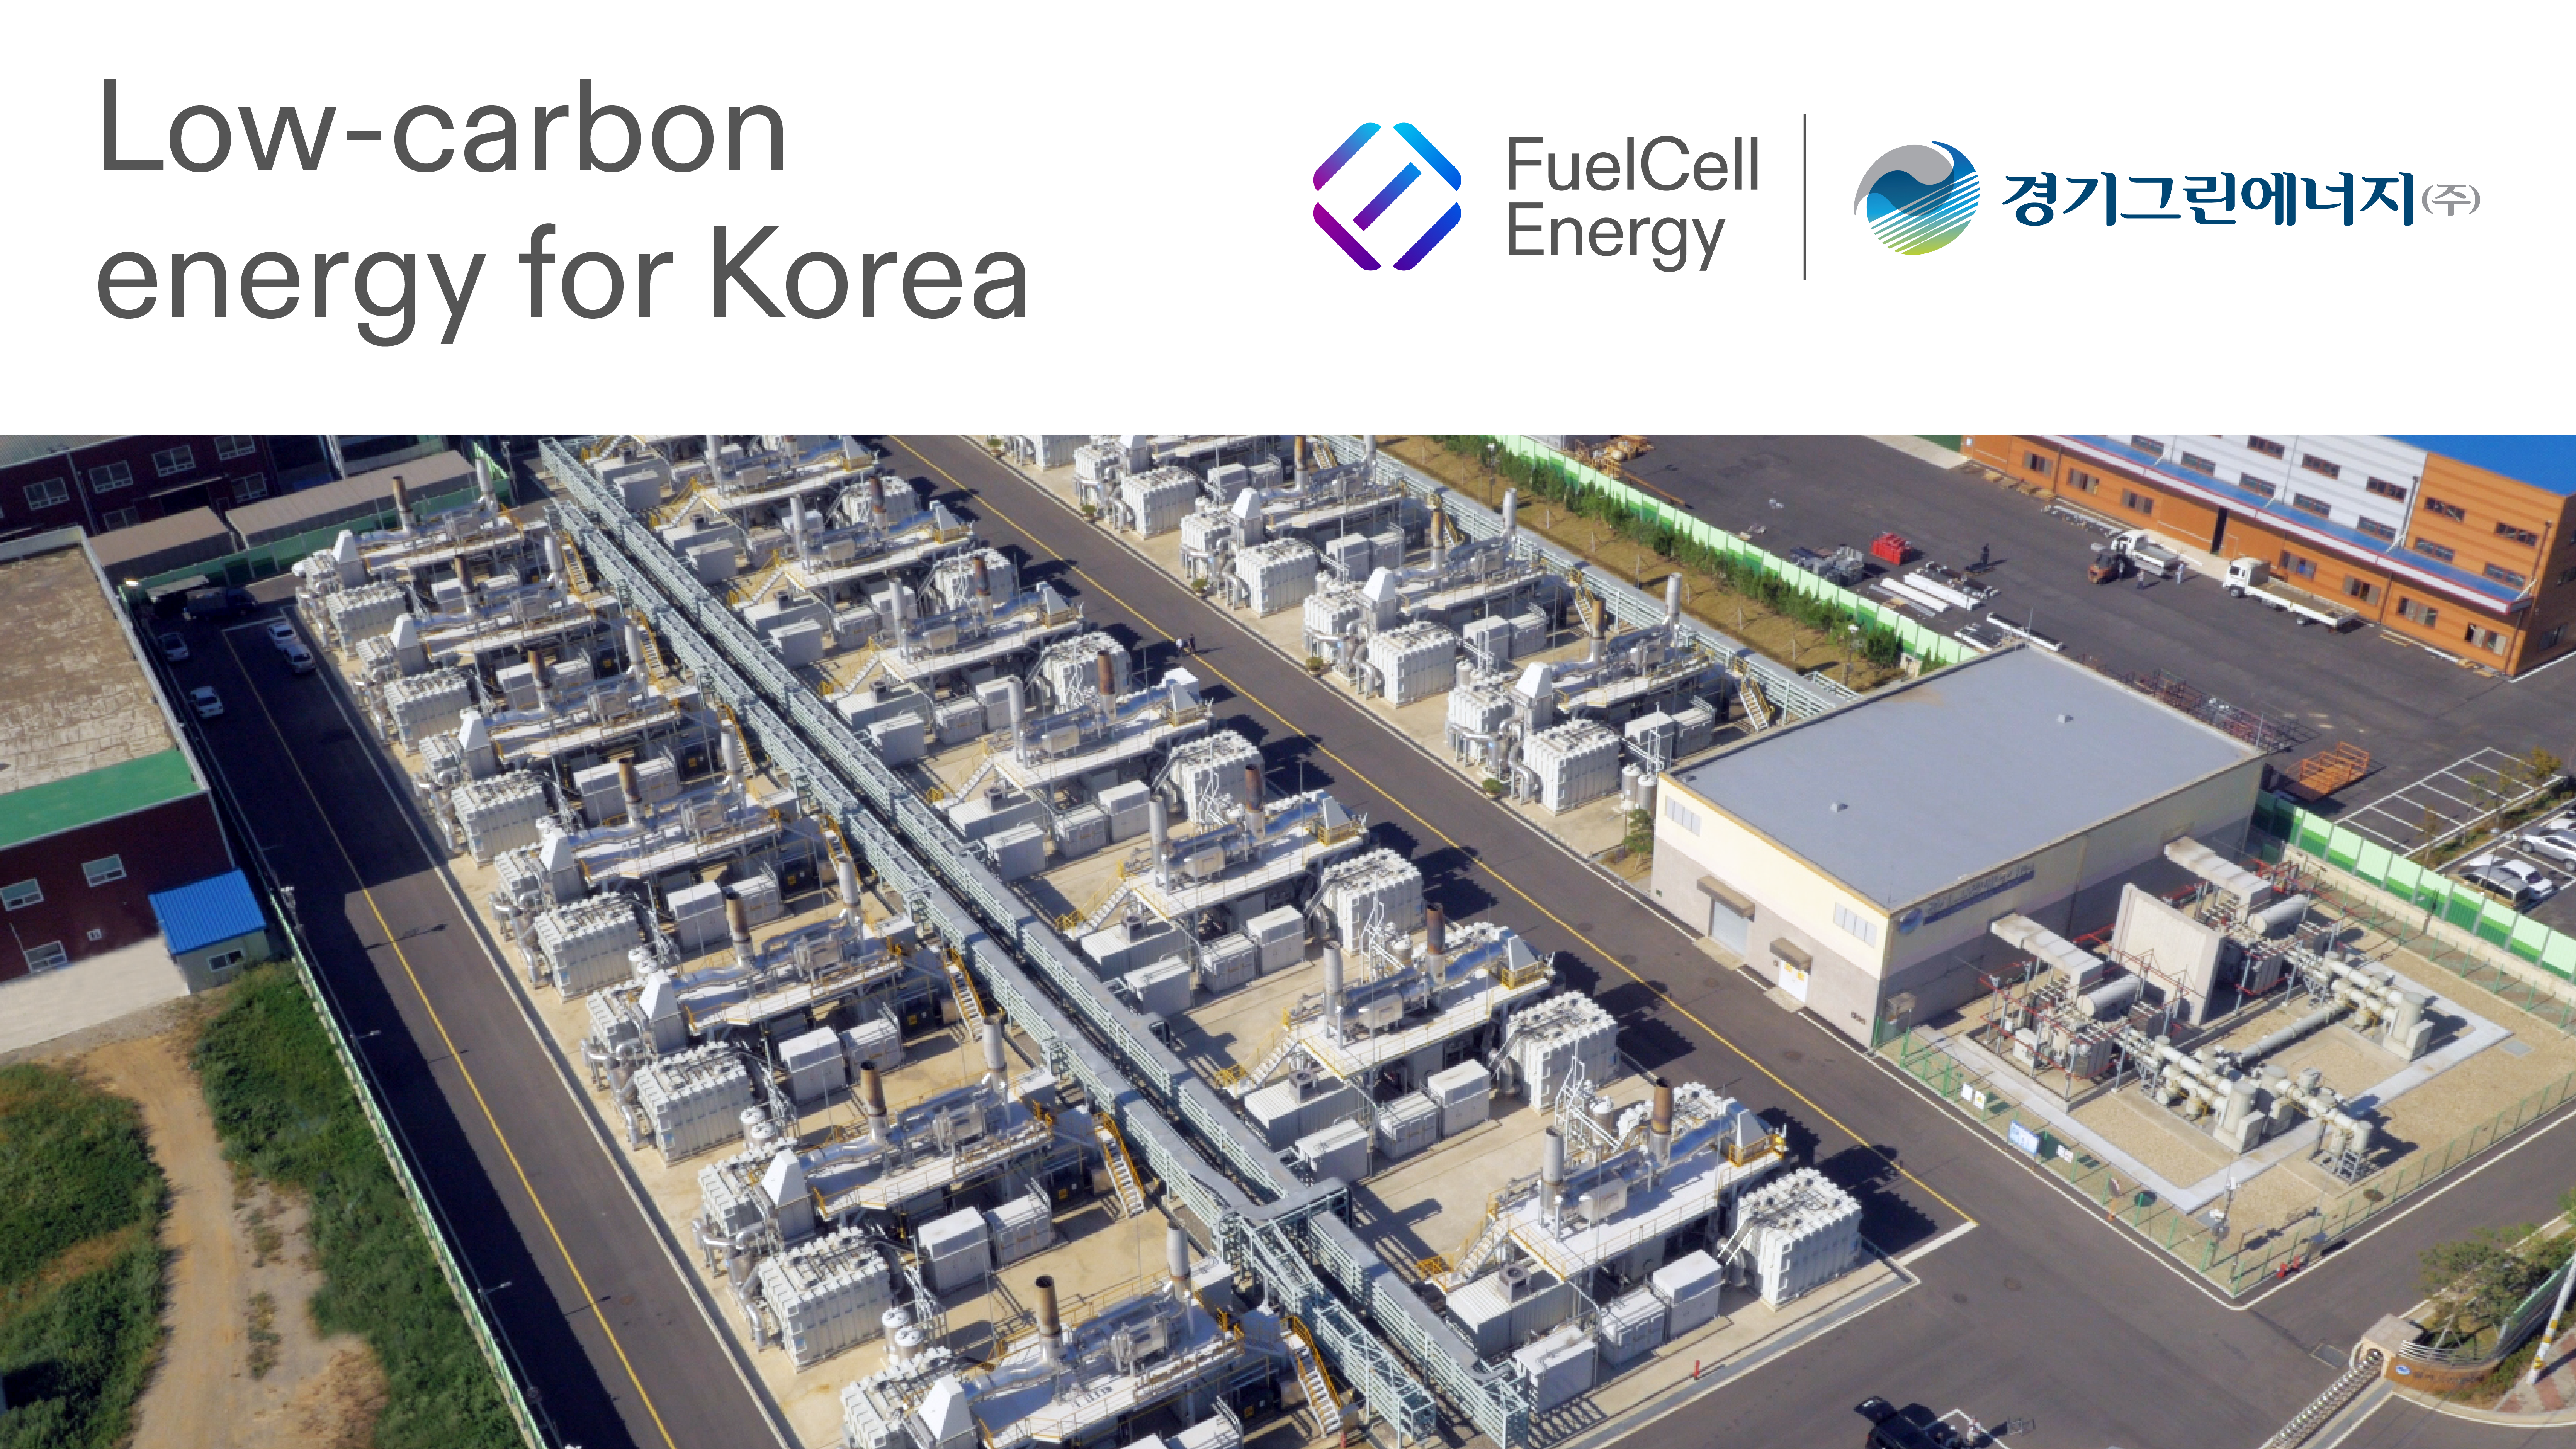 FuelCell Energy and Gyeonggi Green Energy Announce Agreement for Purchase of Fuel Cell Modules and Service Agreement for World’s Largest Fuel Cell Power Platform